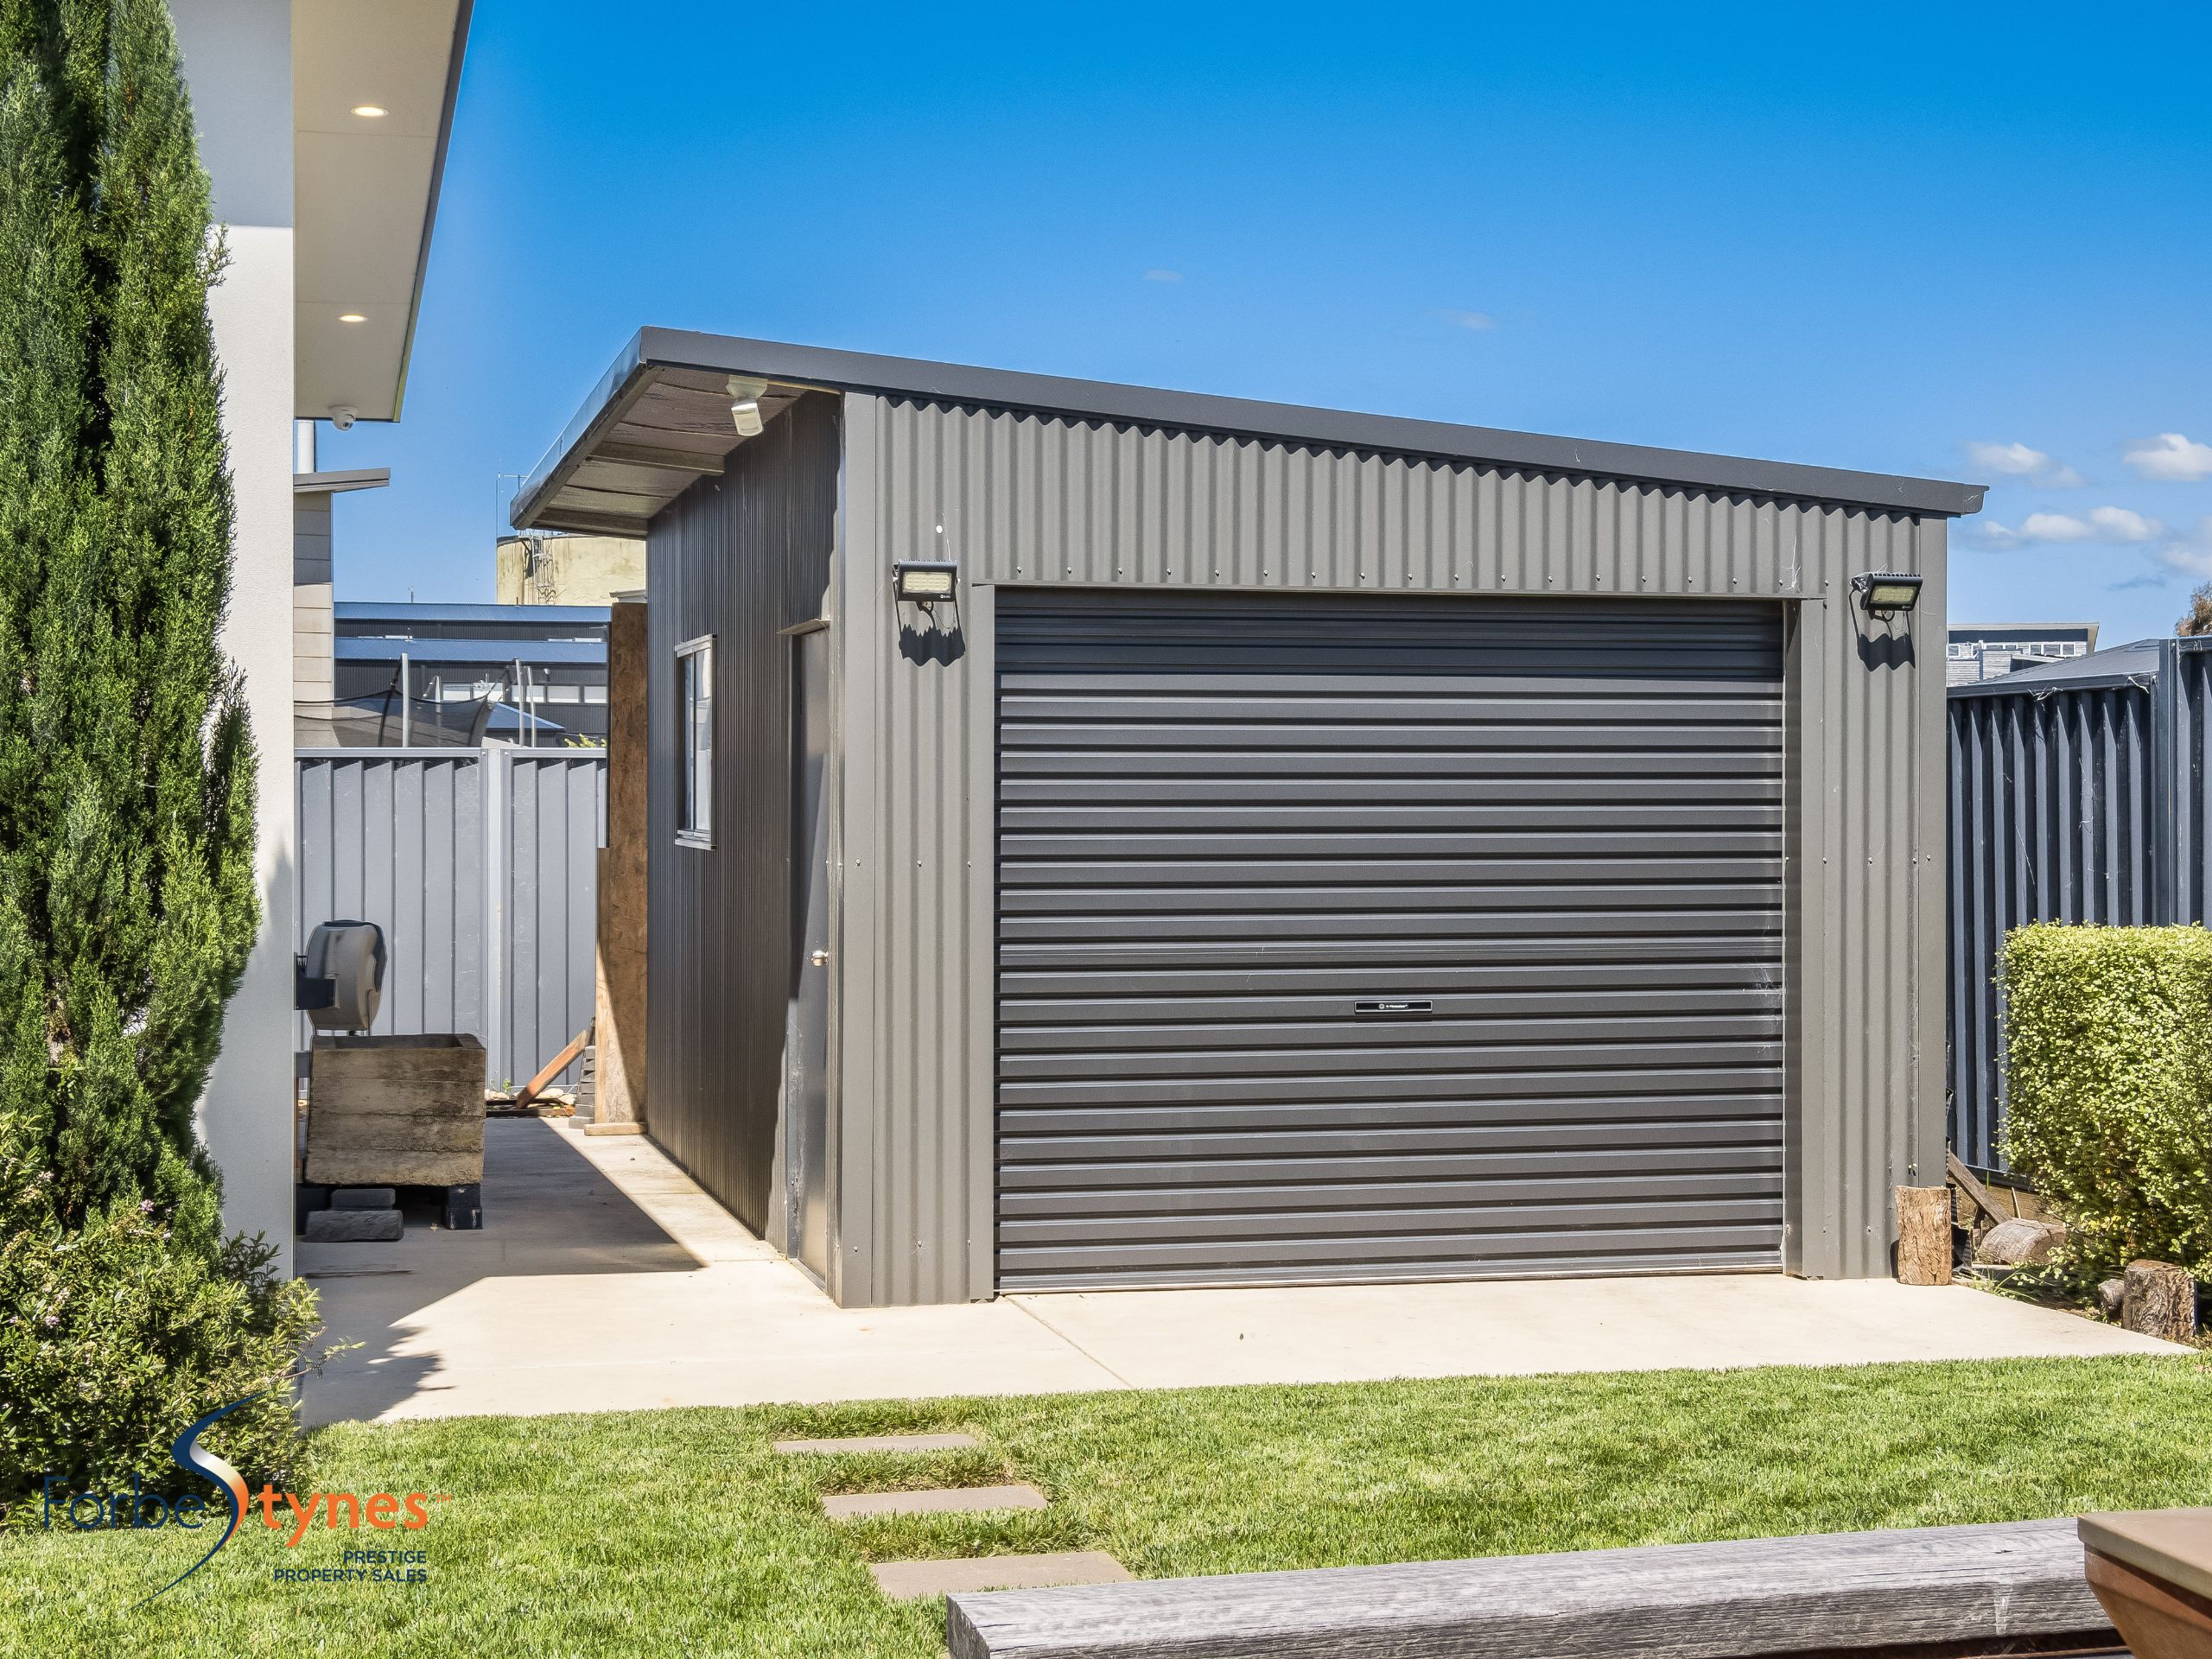 Flawless Luxury Home in Jindabyne – Expressions of Interest (EOI)